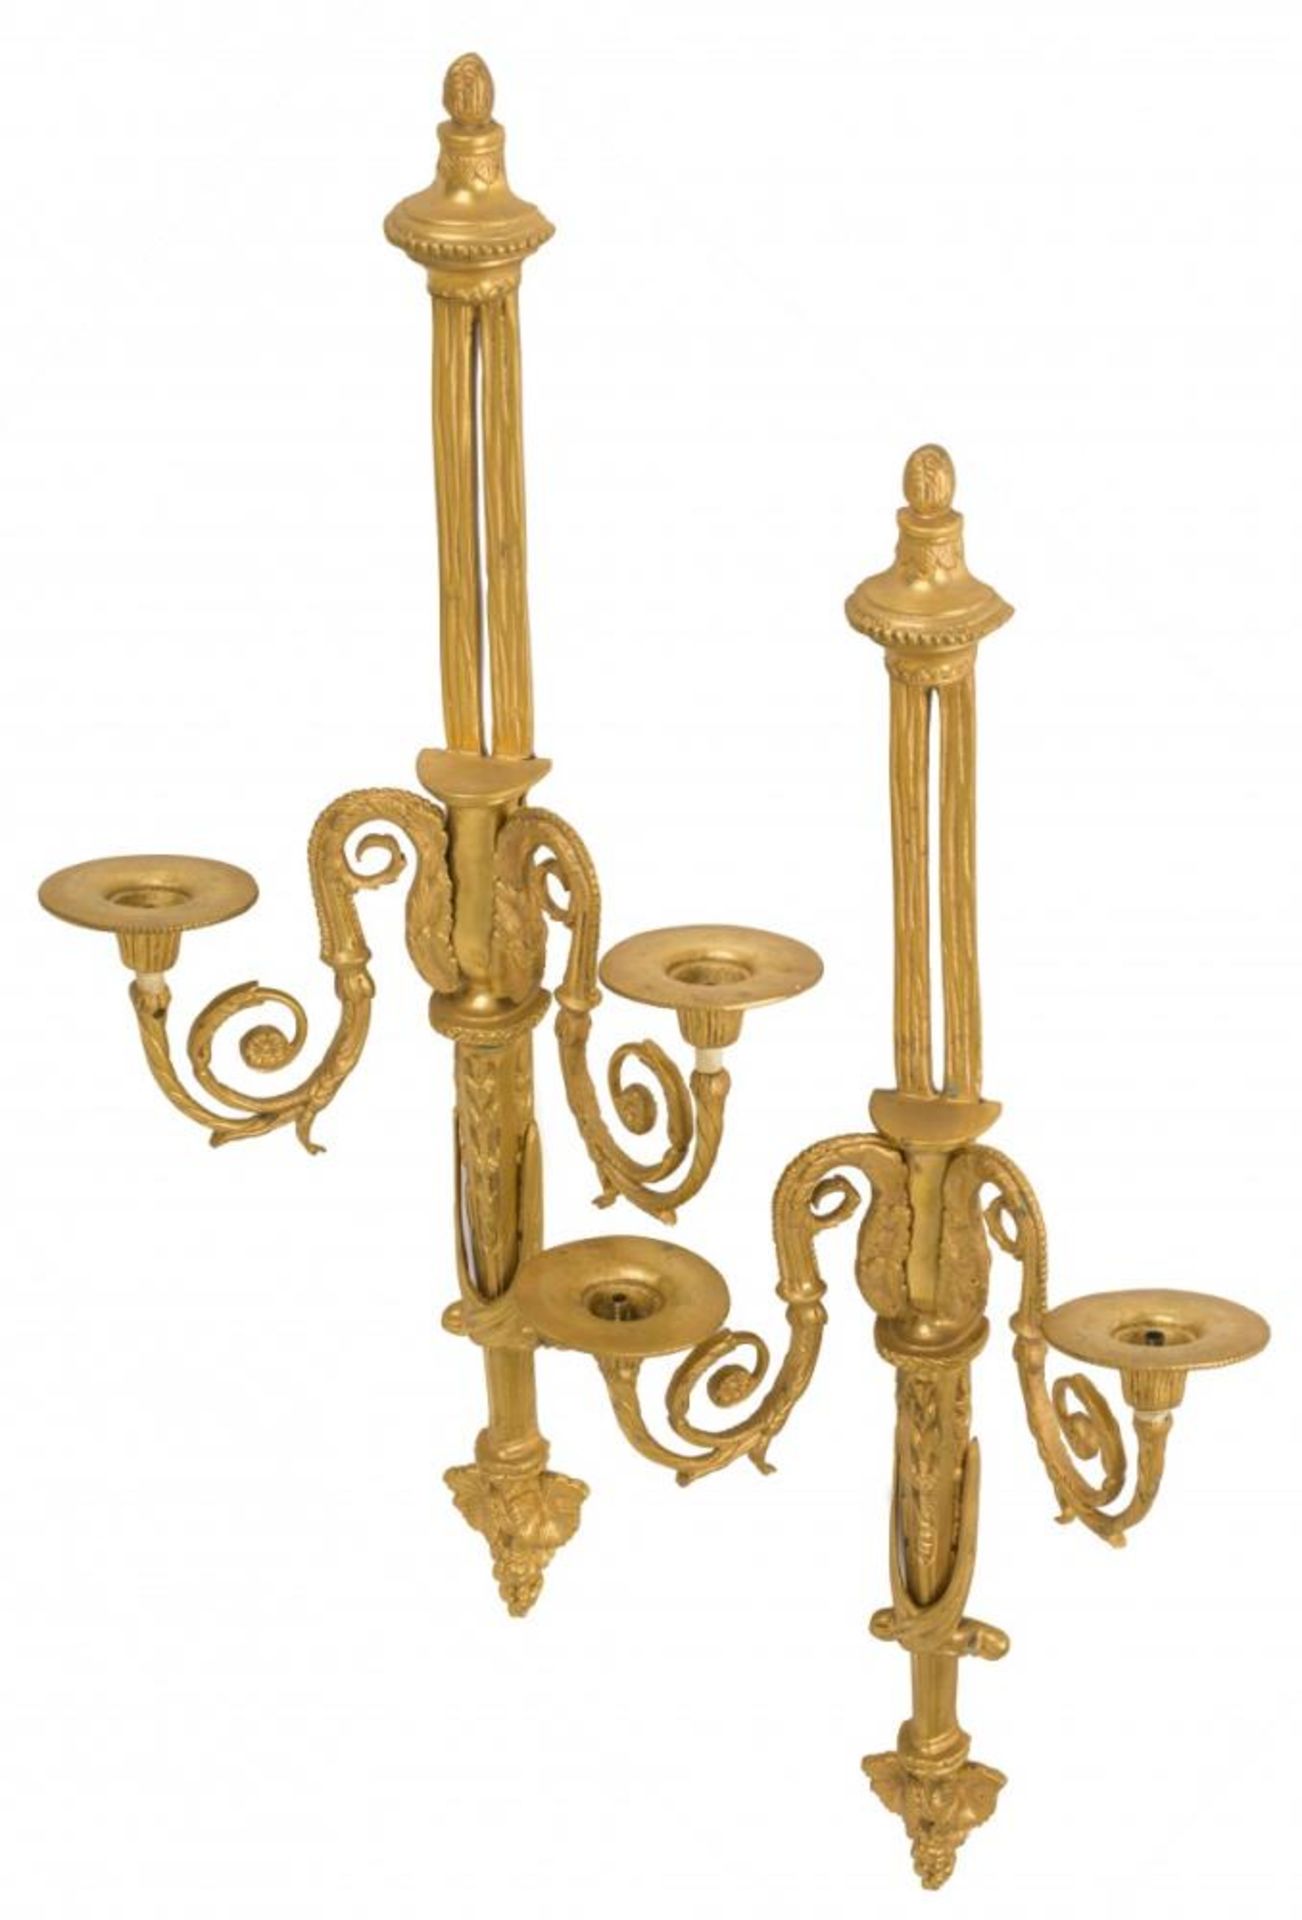 A set of (2) bronze Louis XVI-style wall candelabras, France, 20th century.